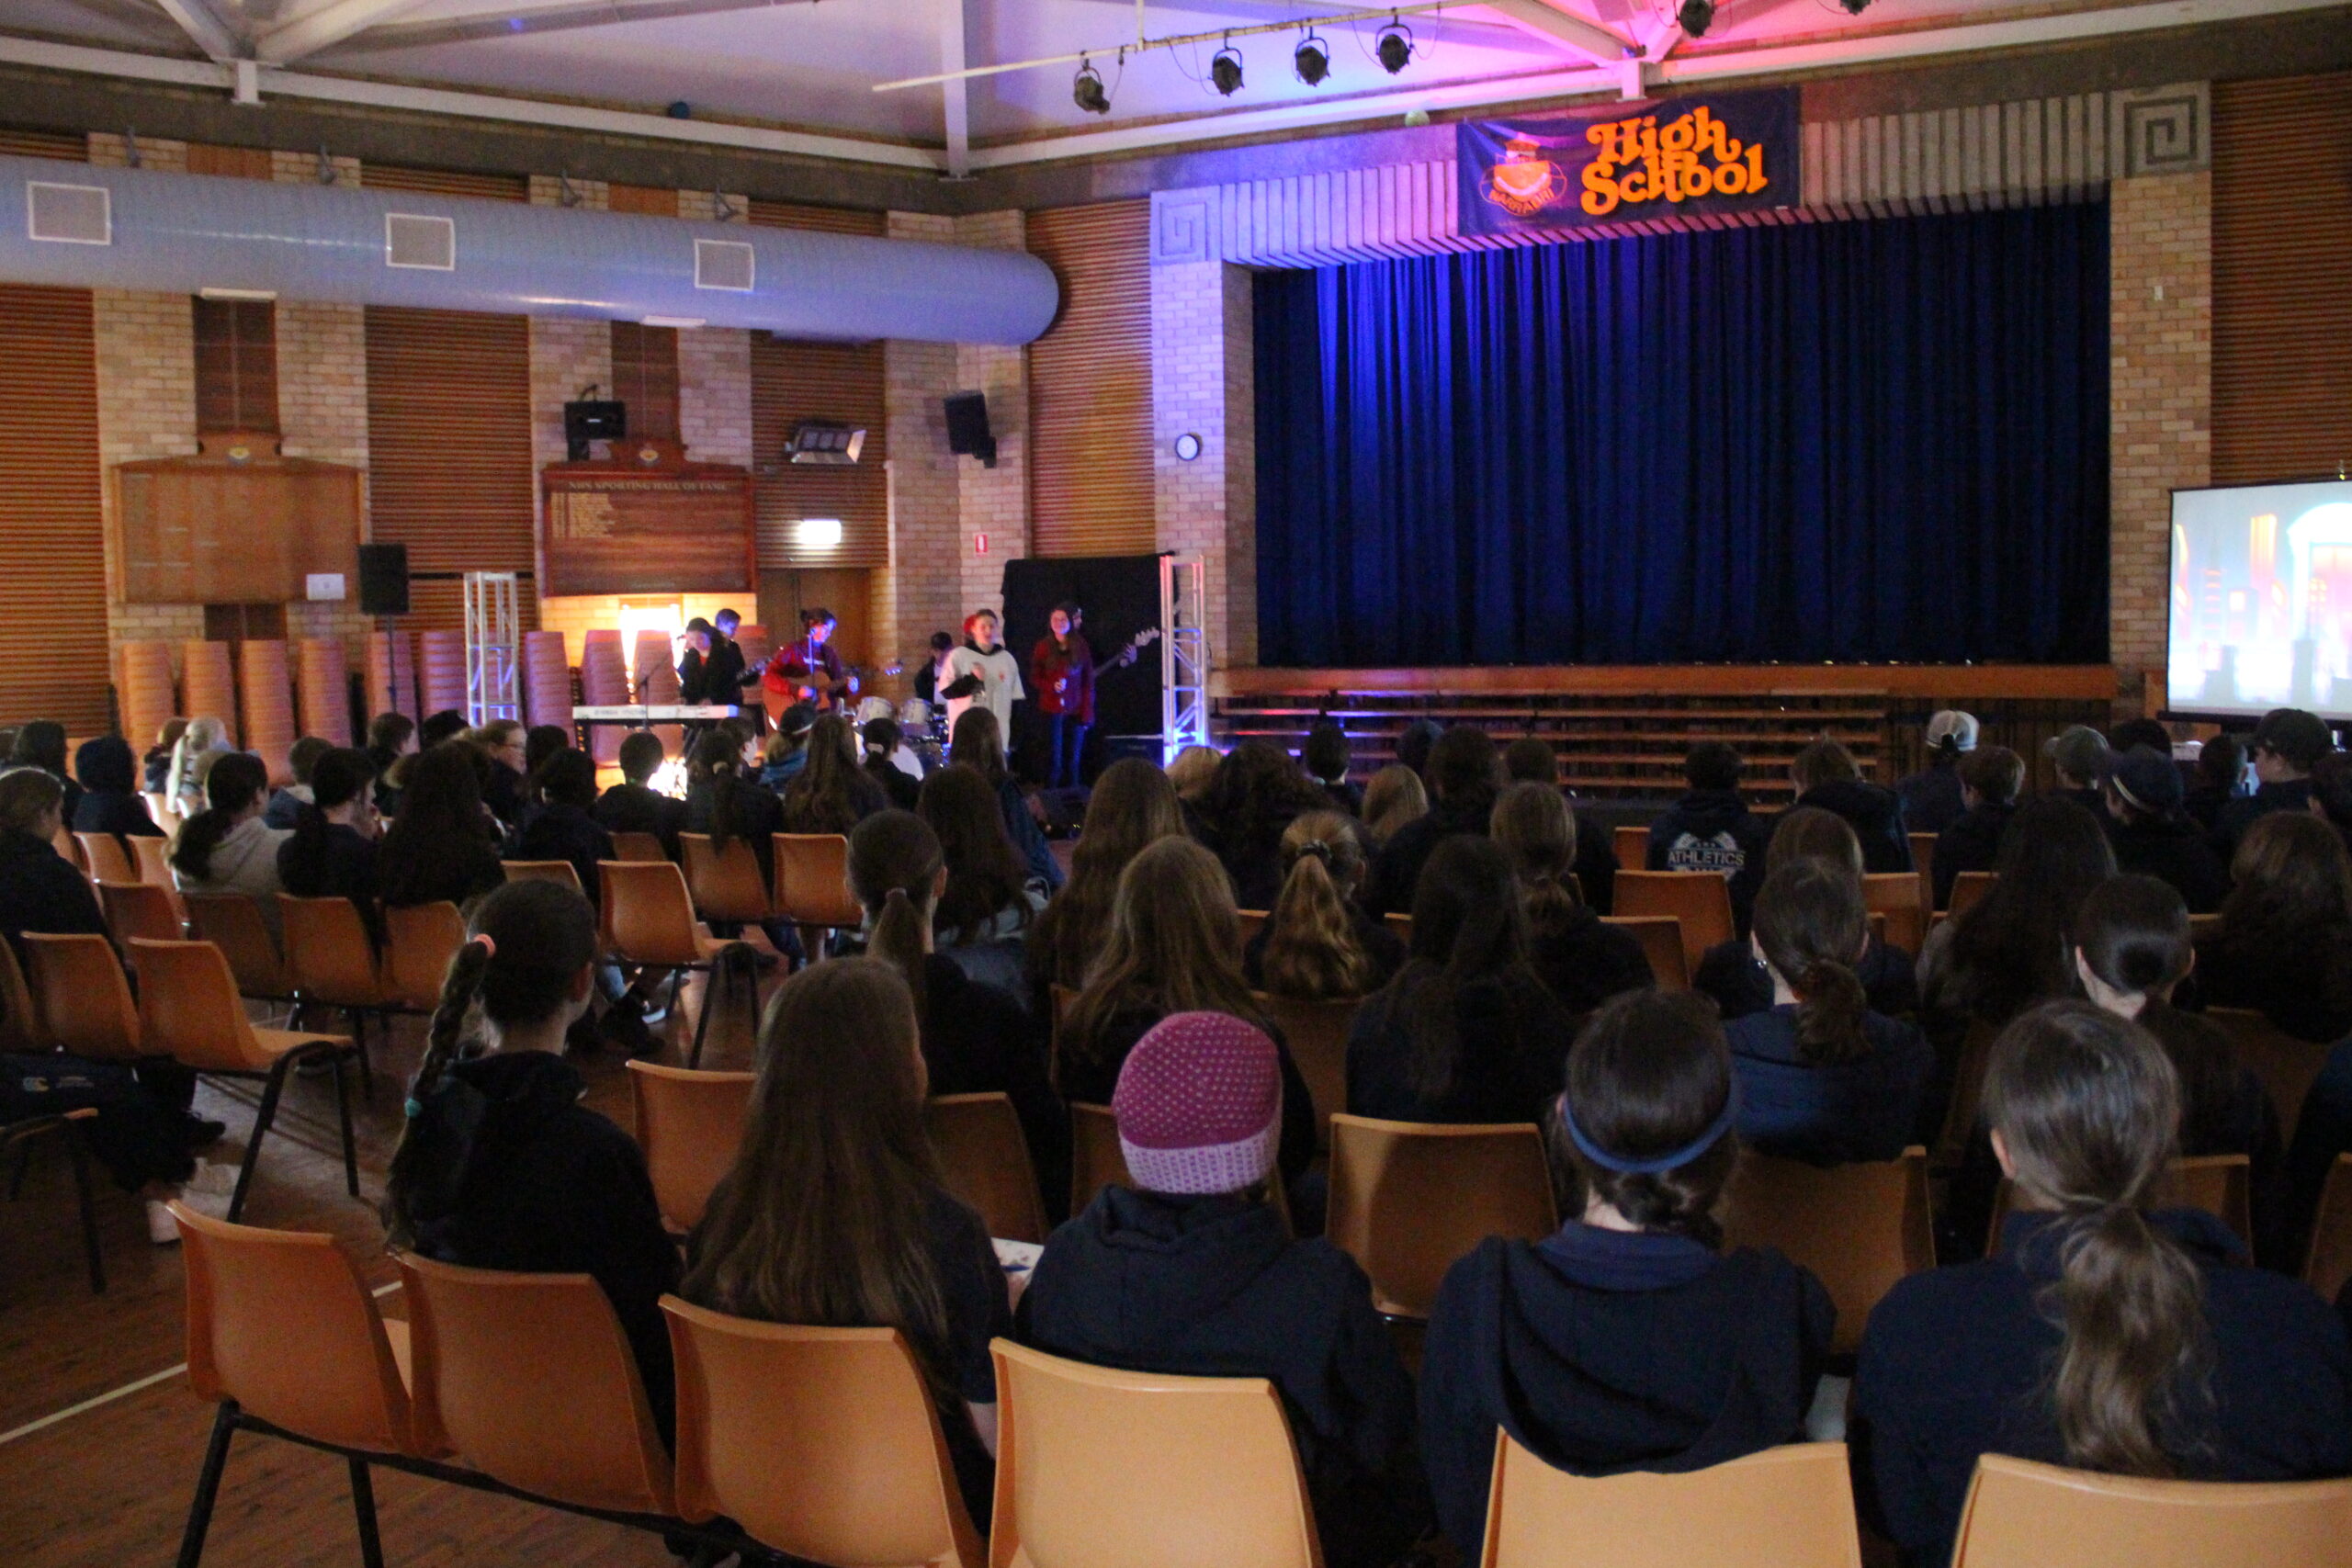 Narrabri High students watching the performance at the school hall.